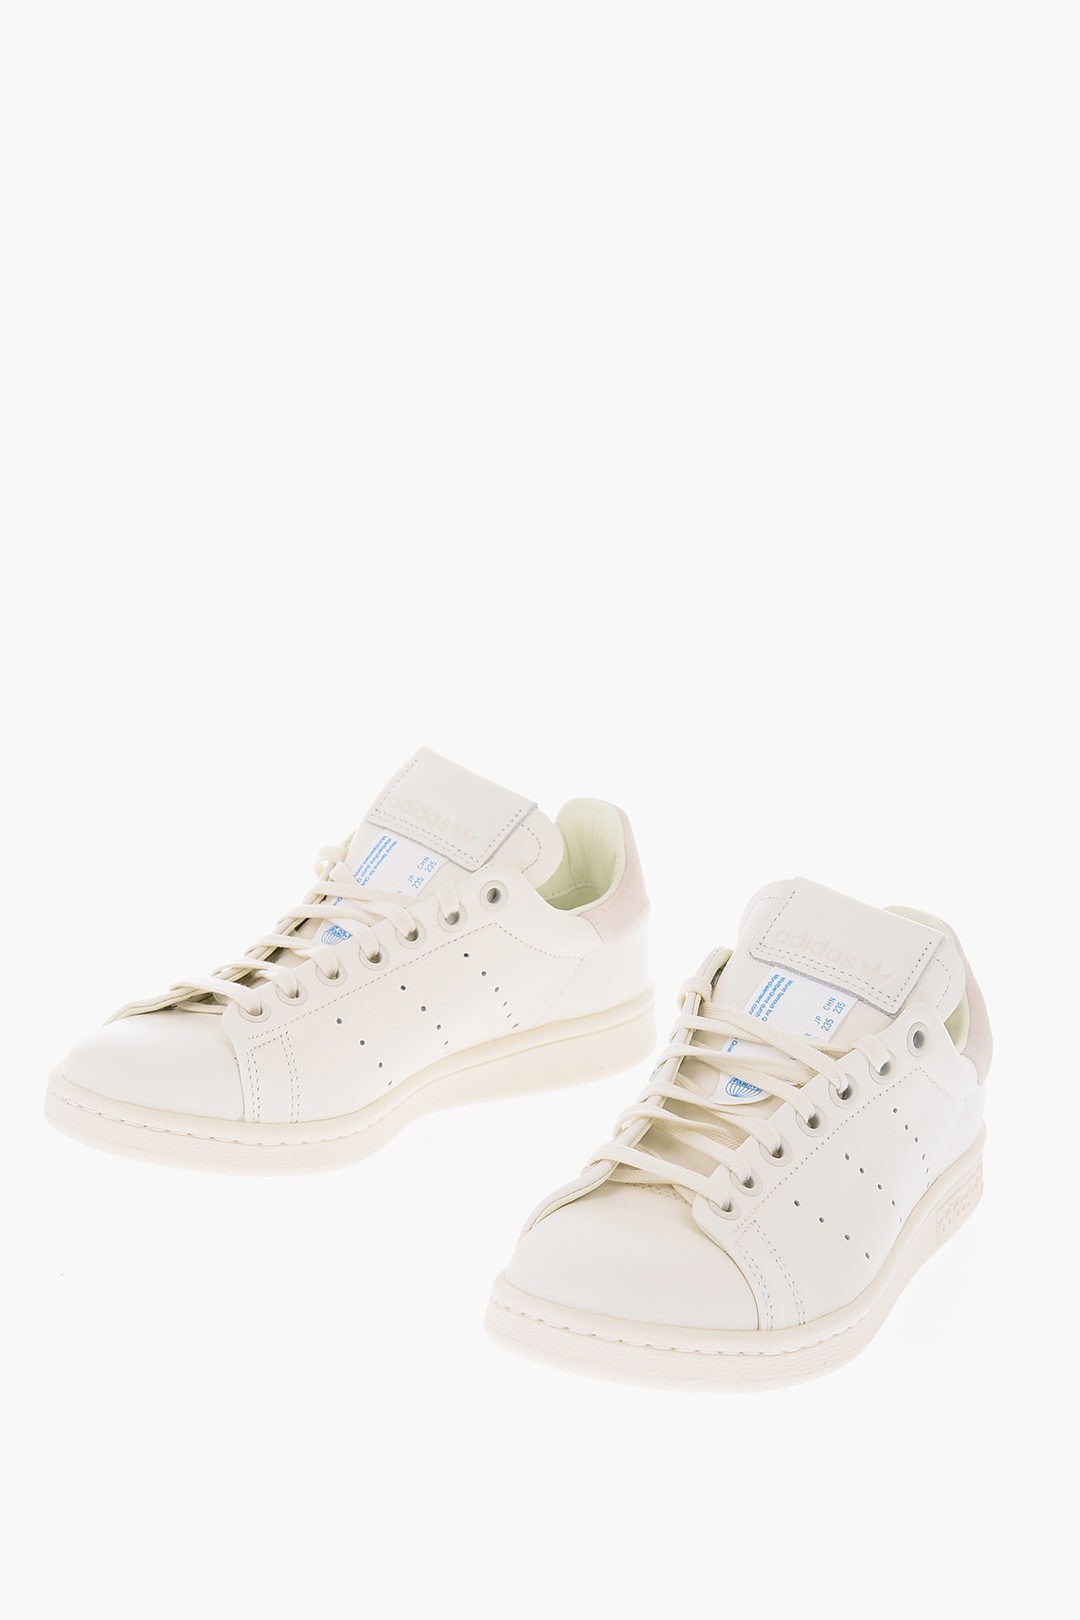 ADIDAS アディダス White スニーカー EF4001OWHITE メンズ LEATHER STAN SMITH RECON LOW SNEAKERS 【関税・送料無料】【ラッピング無料】 dk